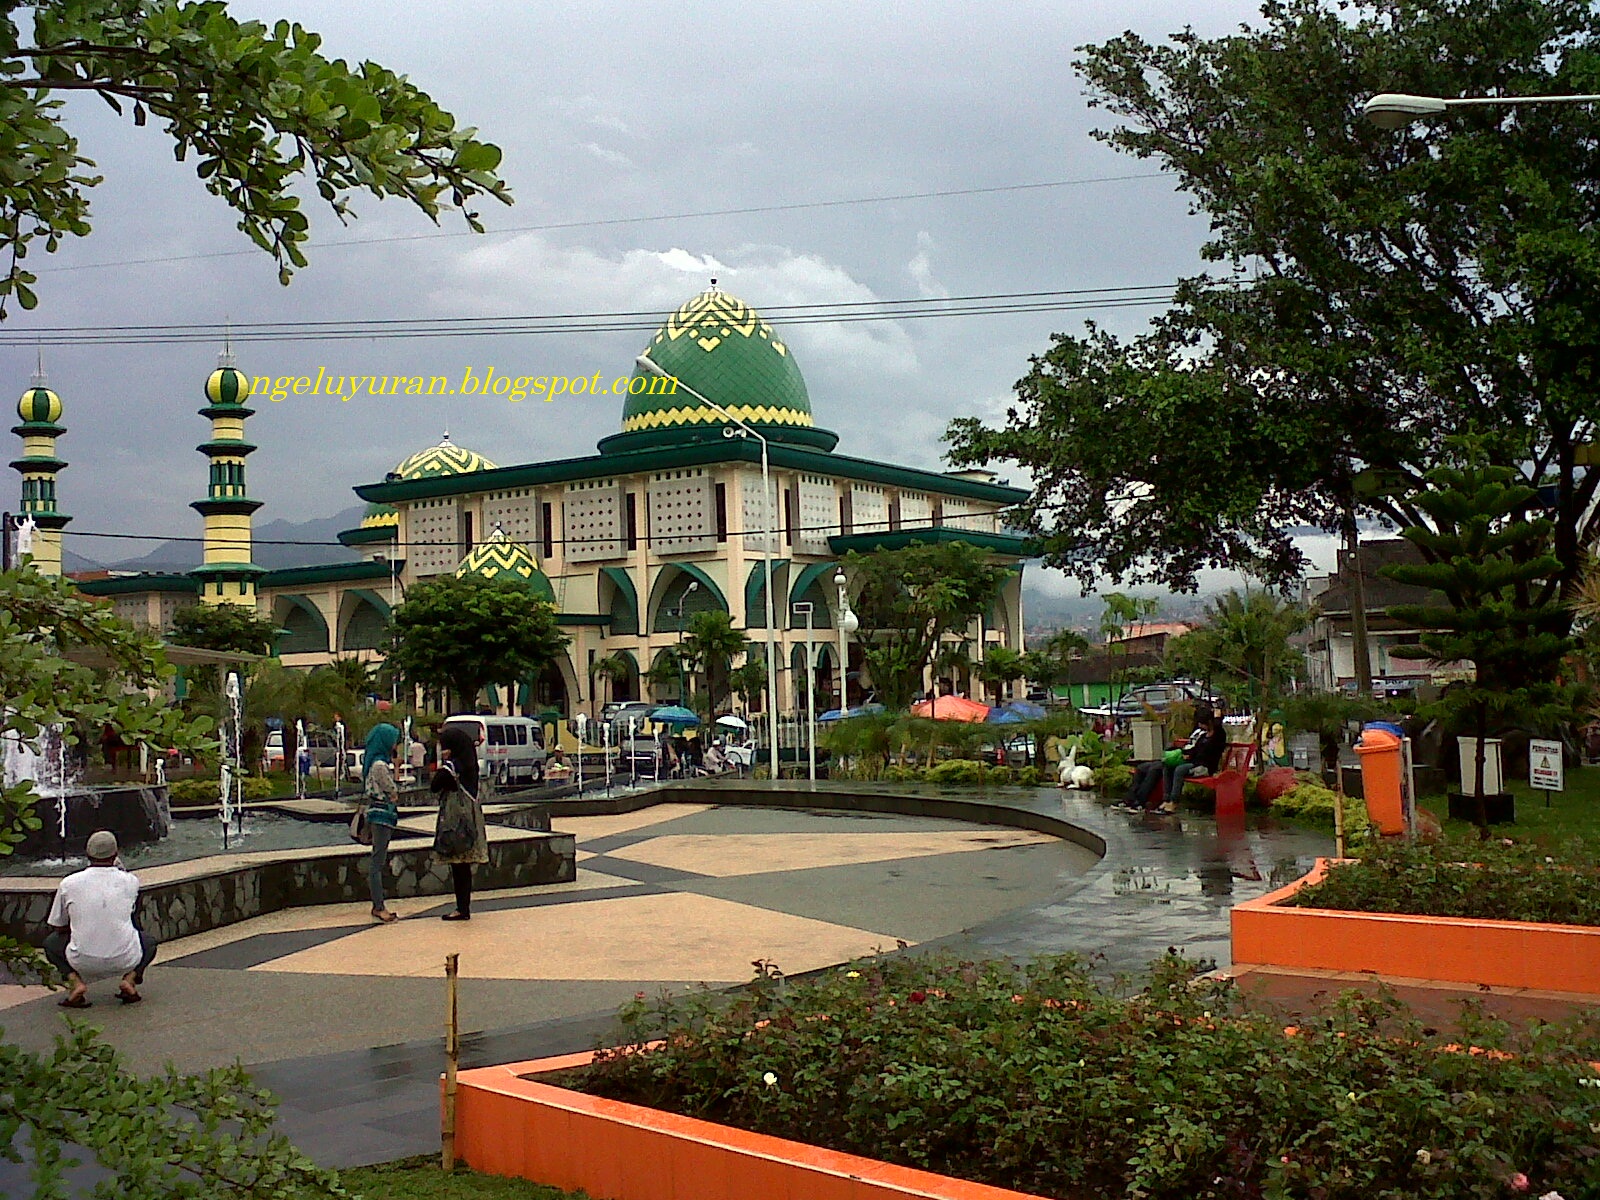 Picnic Together: The Town Square of Batu Malang, East Java